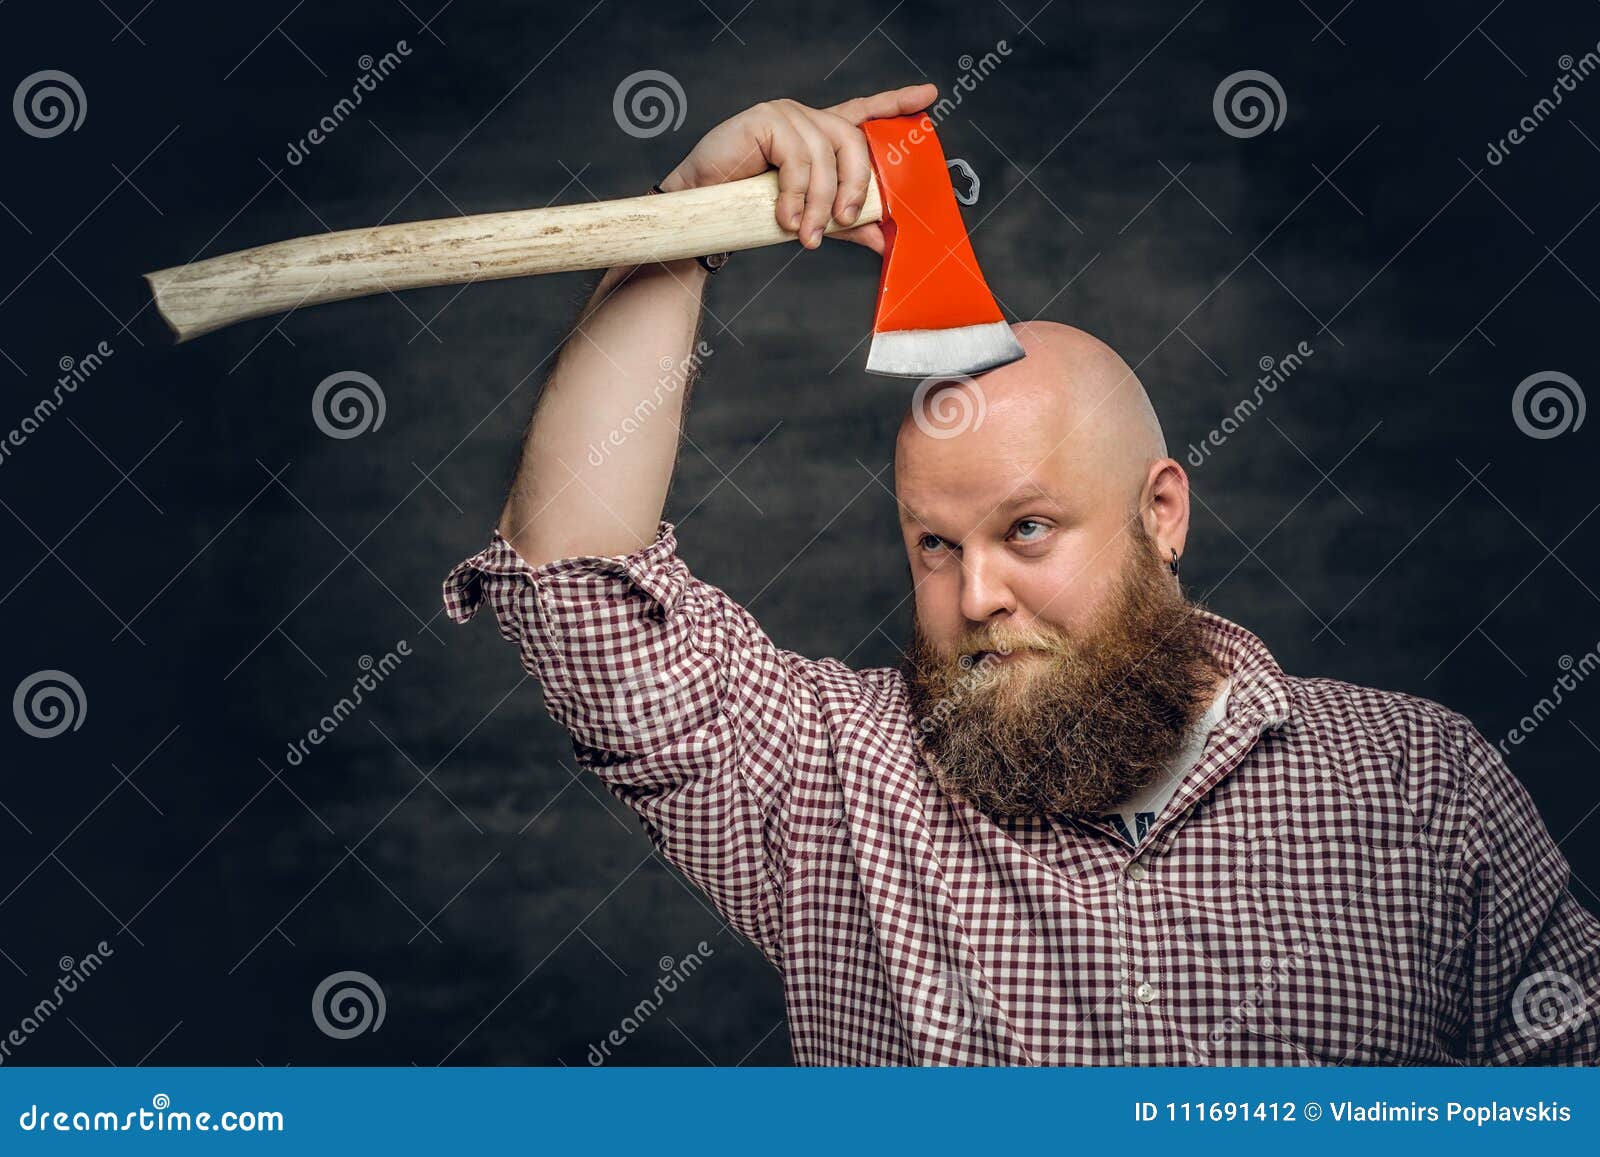 Fat Bald, Bearded Man Holds an Axe. Stock Photo - Image of haircut